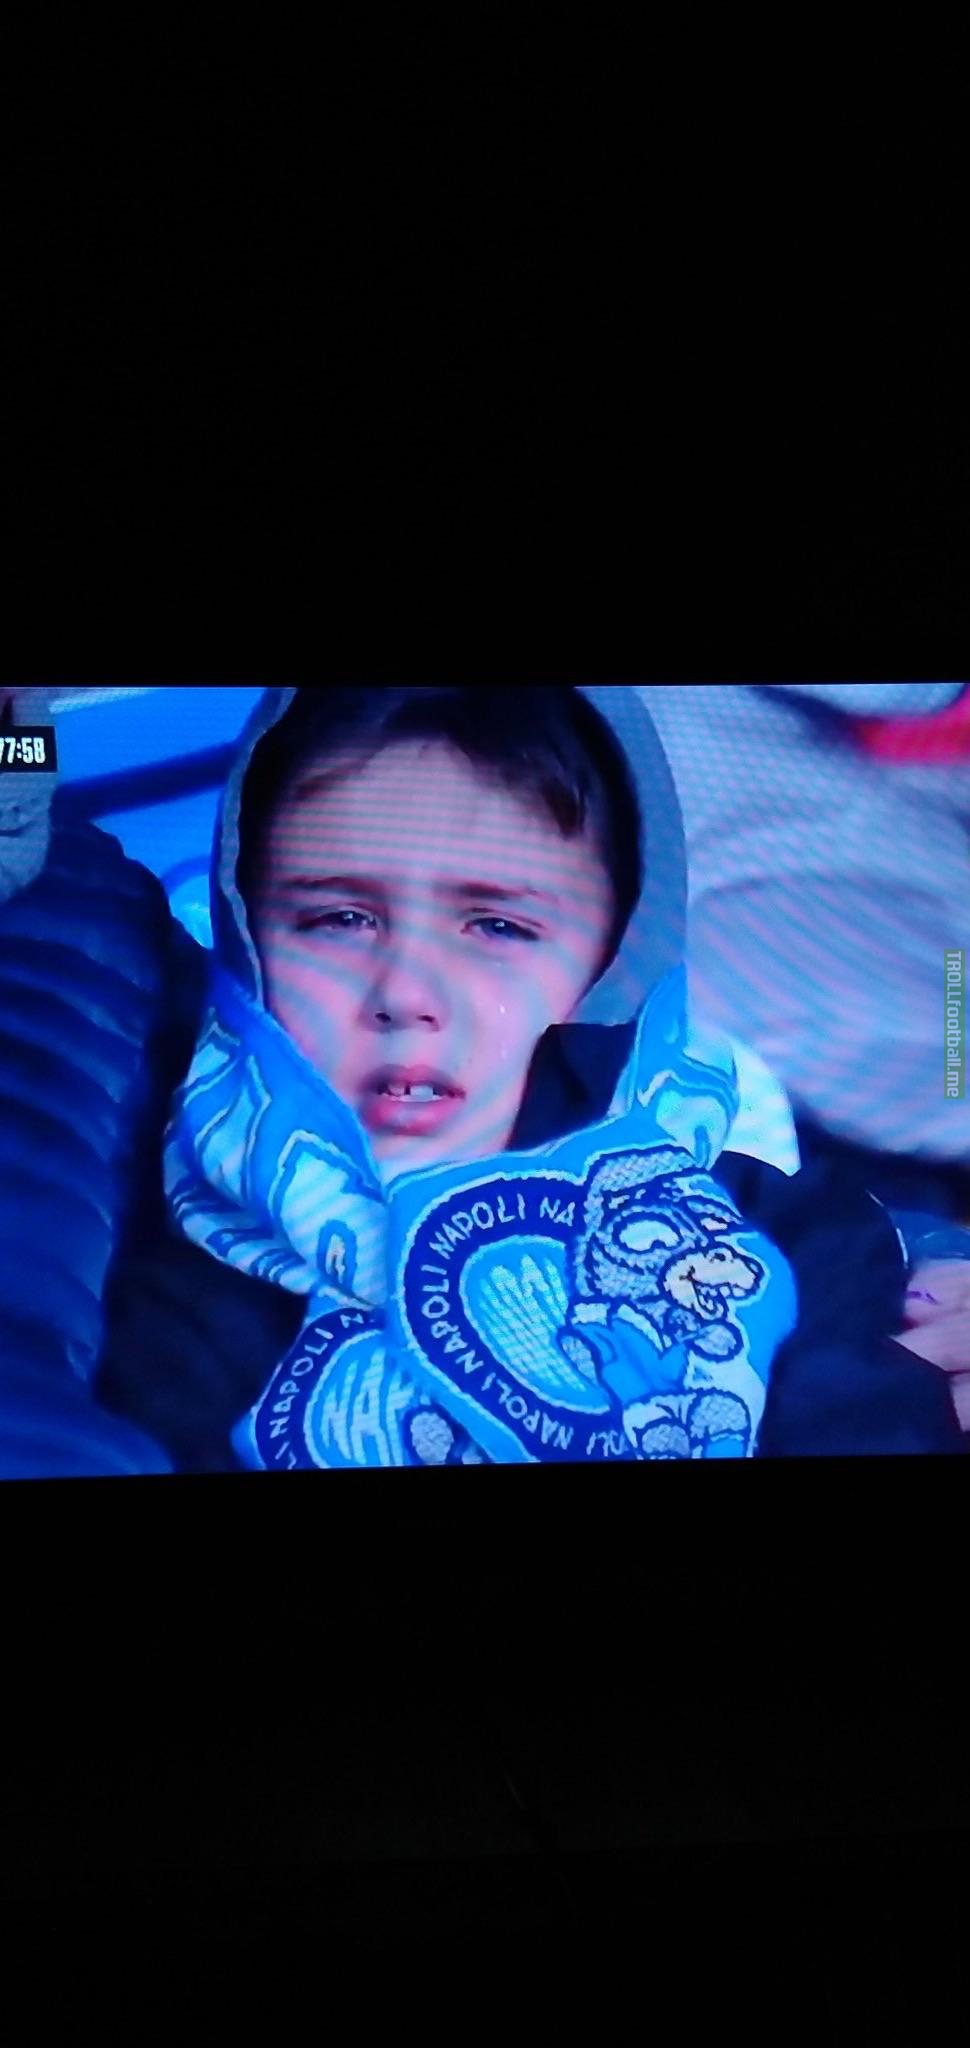 Its so hard to be a Napoli fan these days.